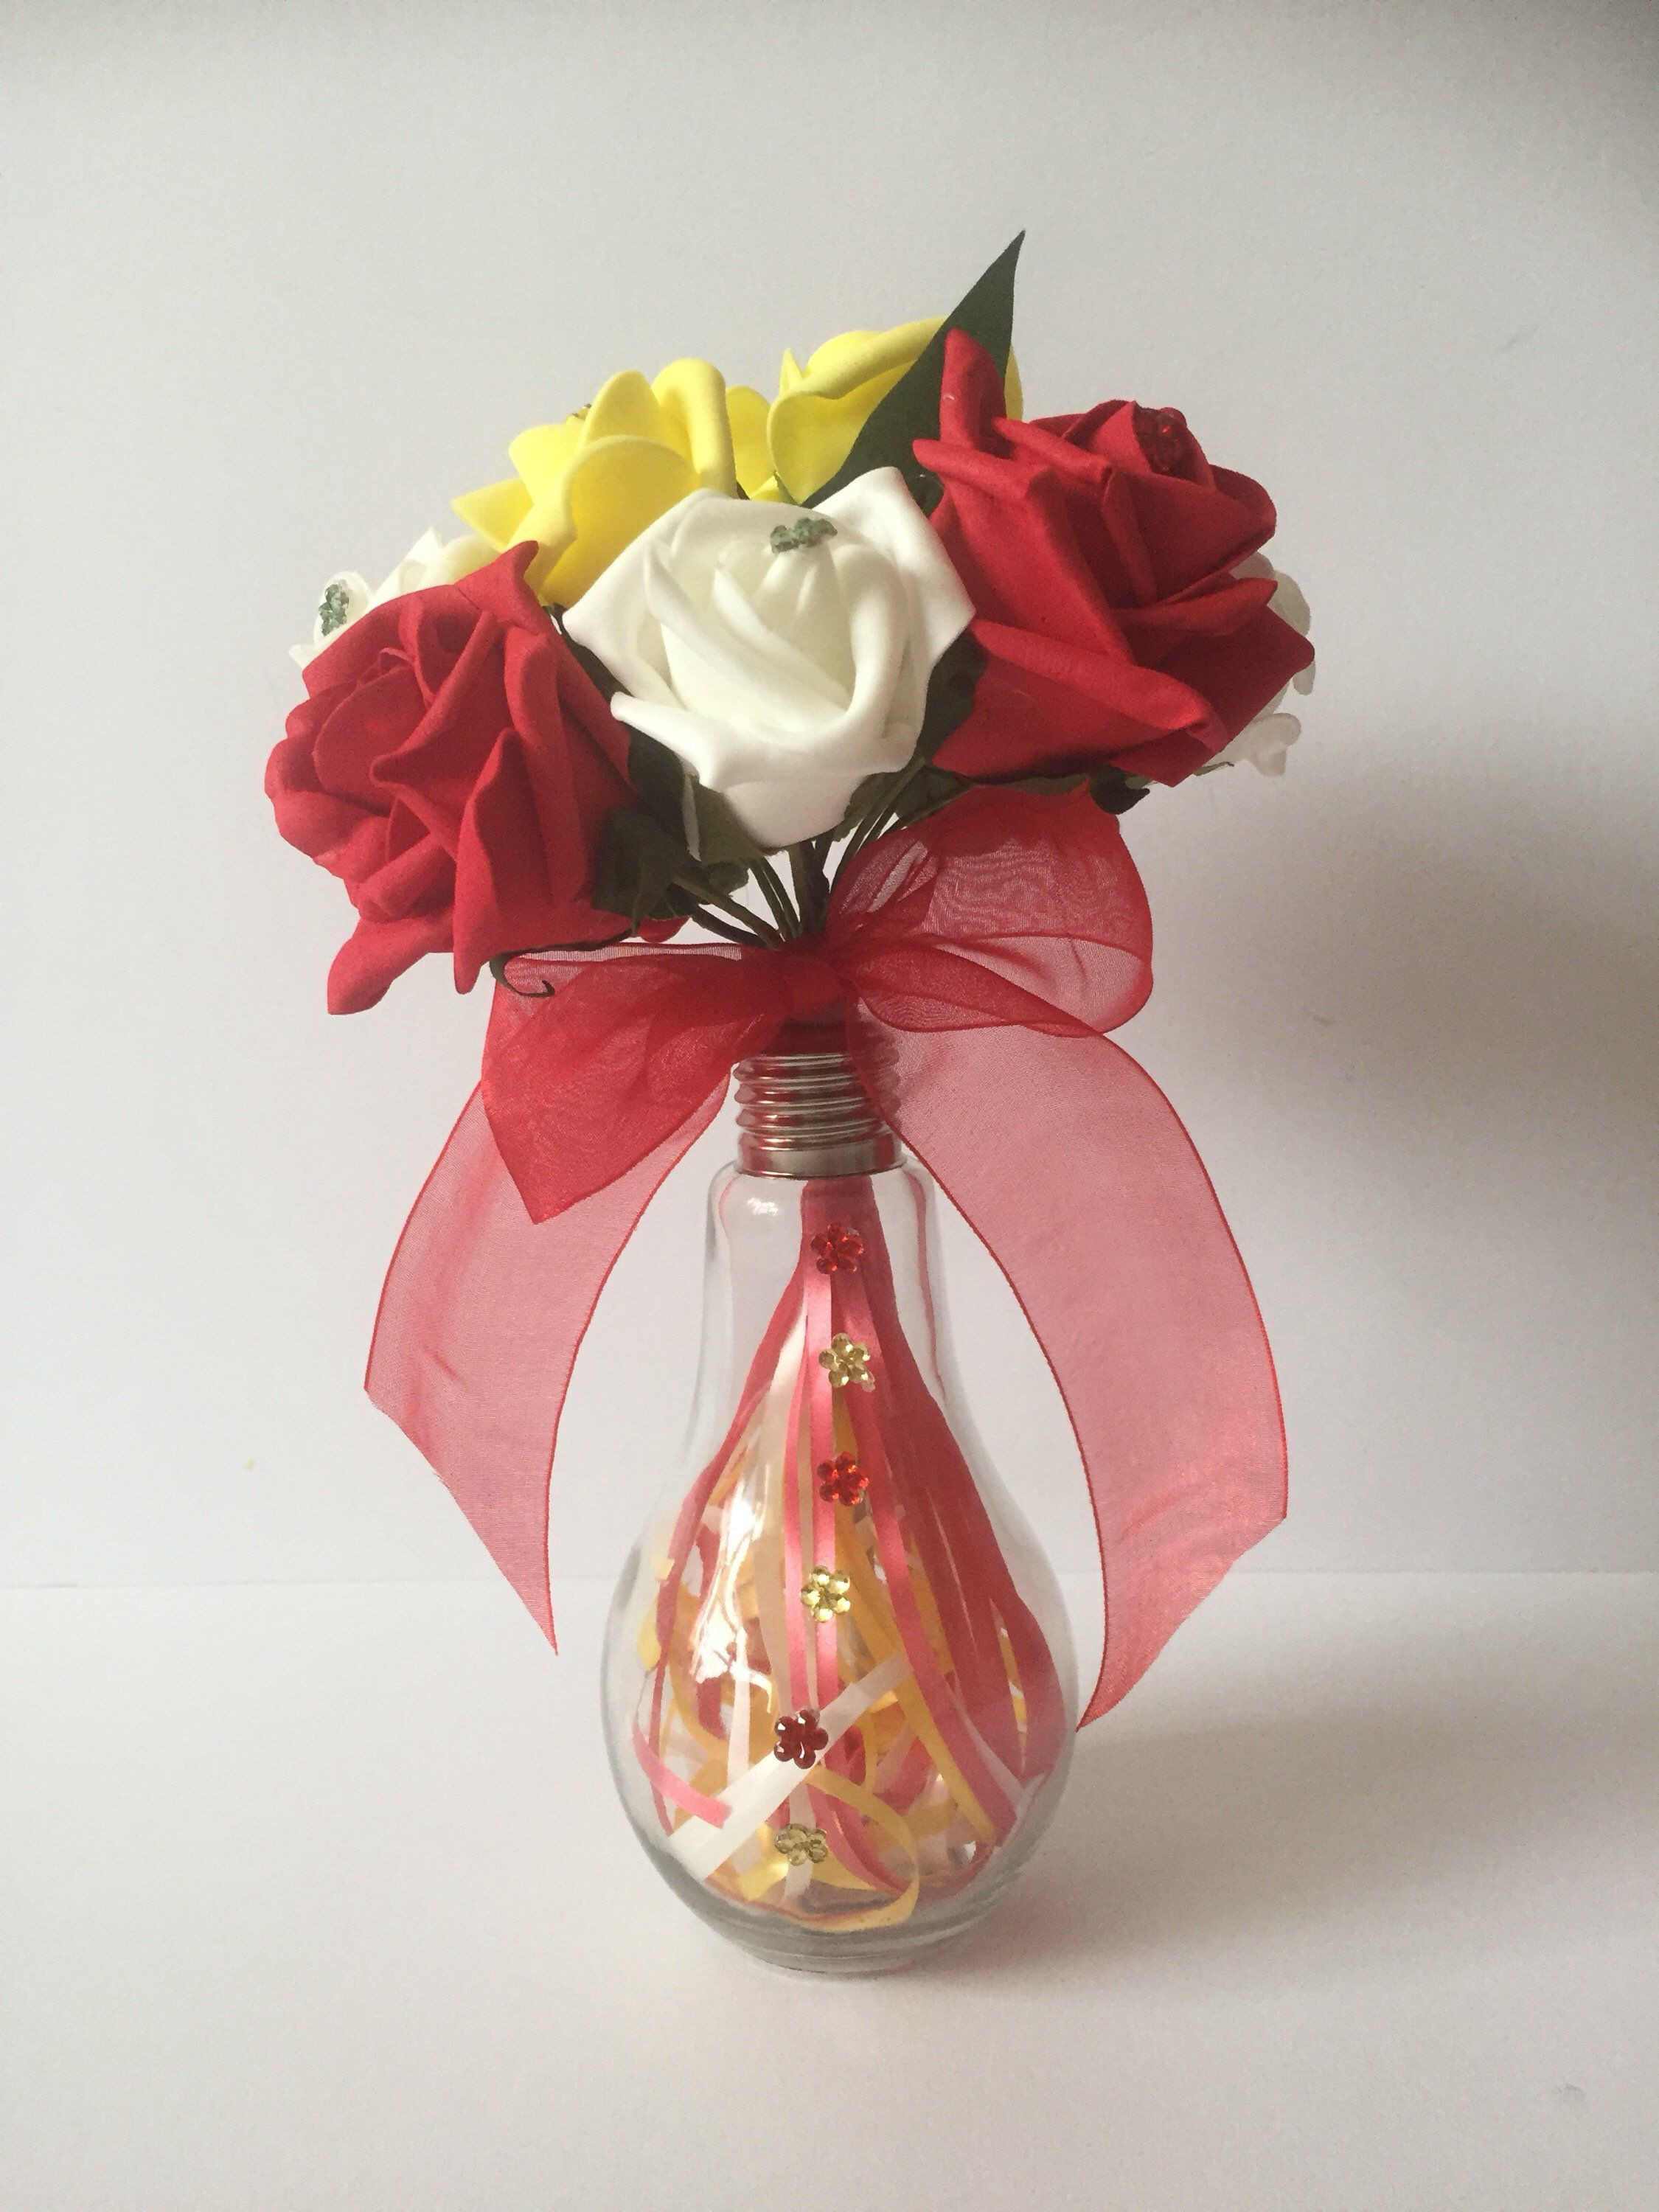 15 Stunning Rose Bouquet In Vase 2024 free download rose bouquet in vase of rose bouquet roses in vase faux flowers flower bouquet home regarding a personal favourite from my etsy shop https www etsy com